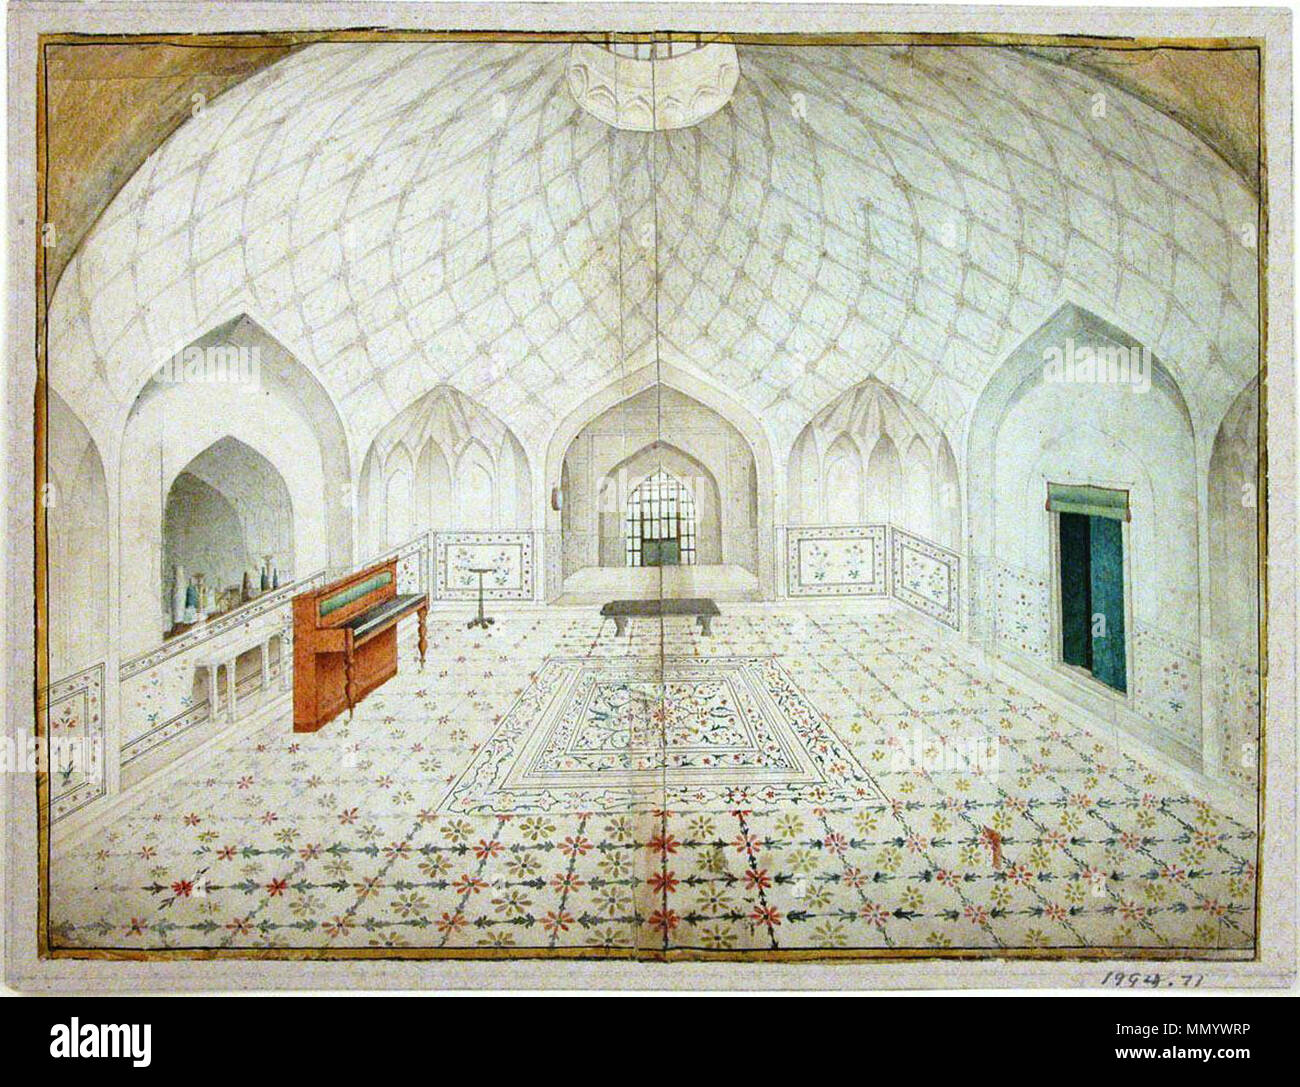 .  English: Interior of the Hammam at the Red Fort, Delhi, furnished according to English Taste. Object Name: Illustrated single work Date: ca. 1830–40 Geography: India, Delhi Culture: Colonial British Medium: Opaque watercolor on paper Dimensions: H. 9 1/8 in. (23.2 cm) W. 12 1/8 in. (30.8cm) Classification: Codices Credit Line: Louis E. and Theresa S. Seley Purchase Fund for Islamic Art, 1994 Accession Number: 1994.71.  . circa 1830–40 or after 1857. Unknown Hammam Red Fort interior Stock Photo